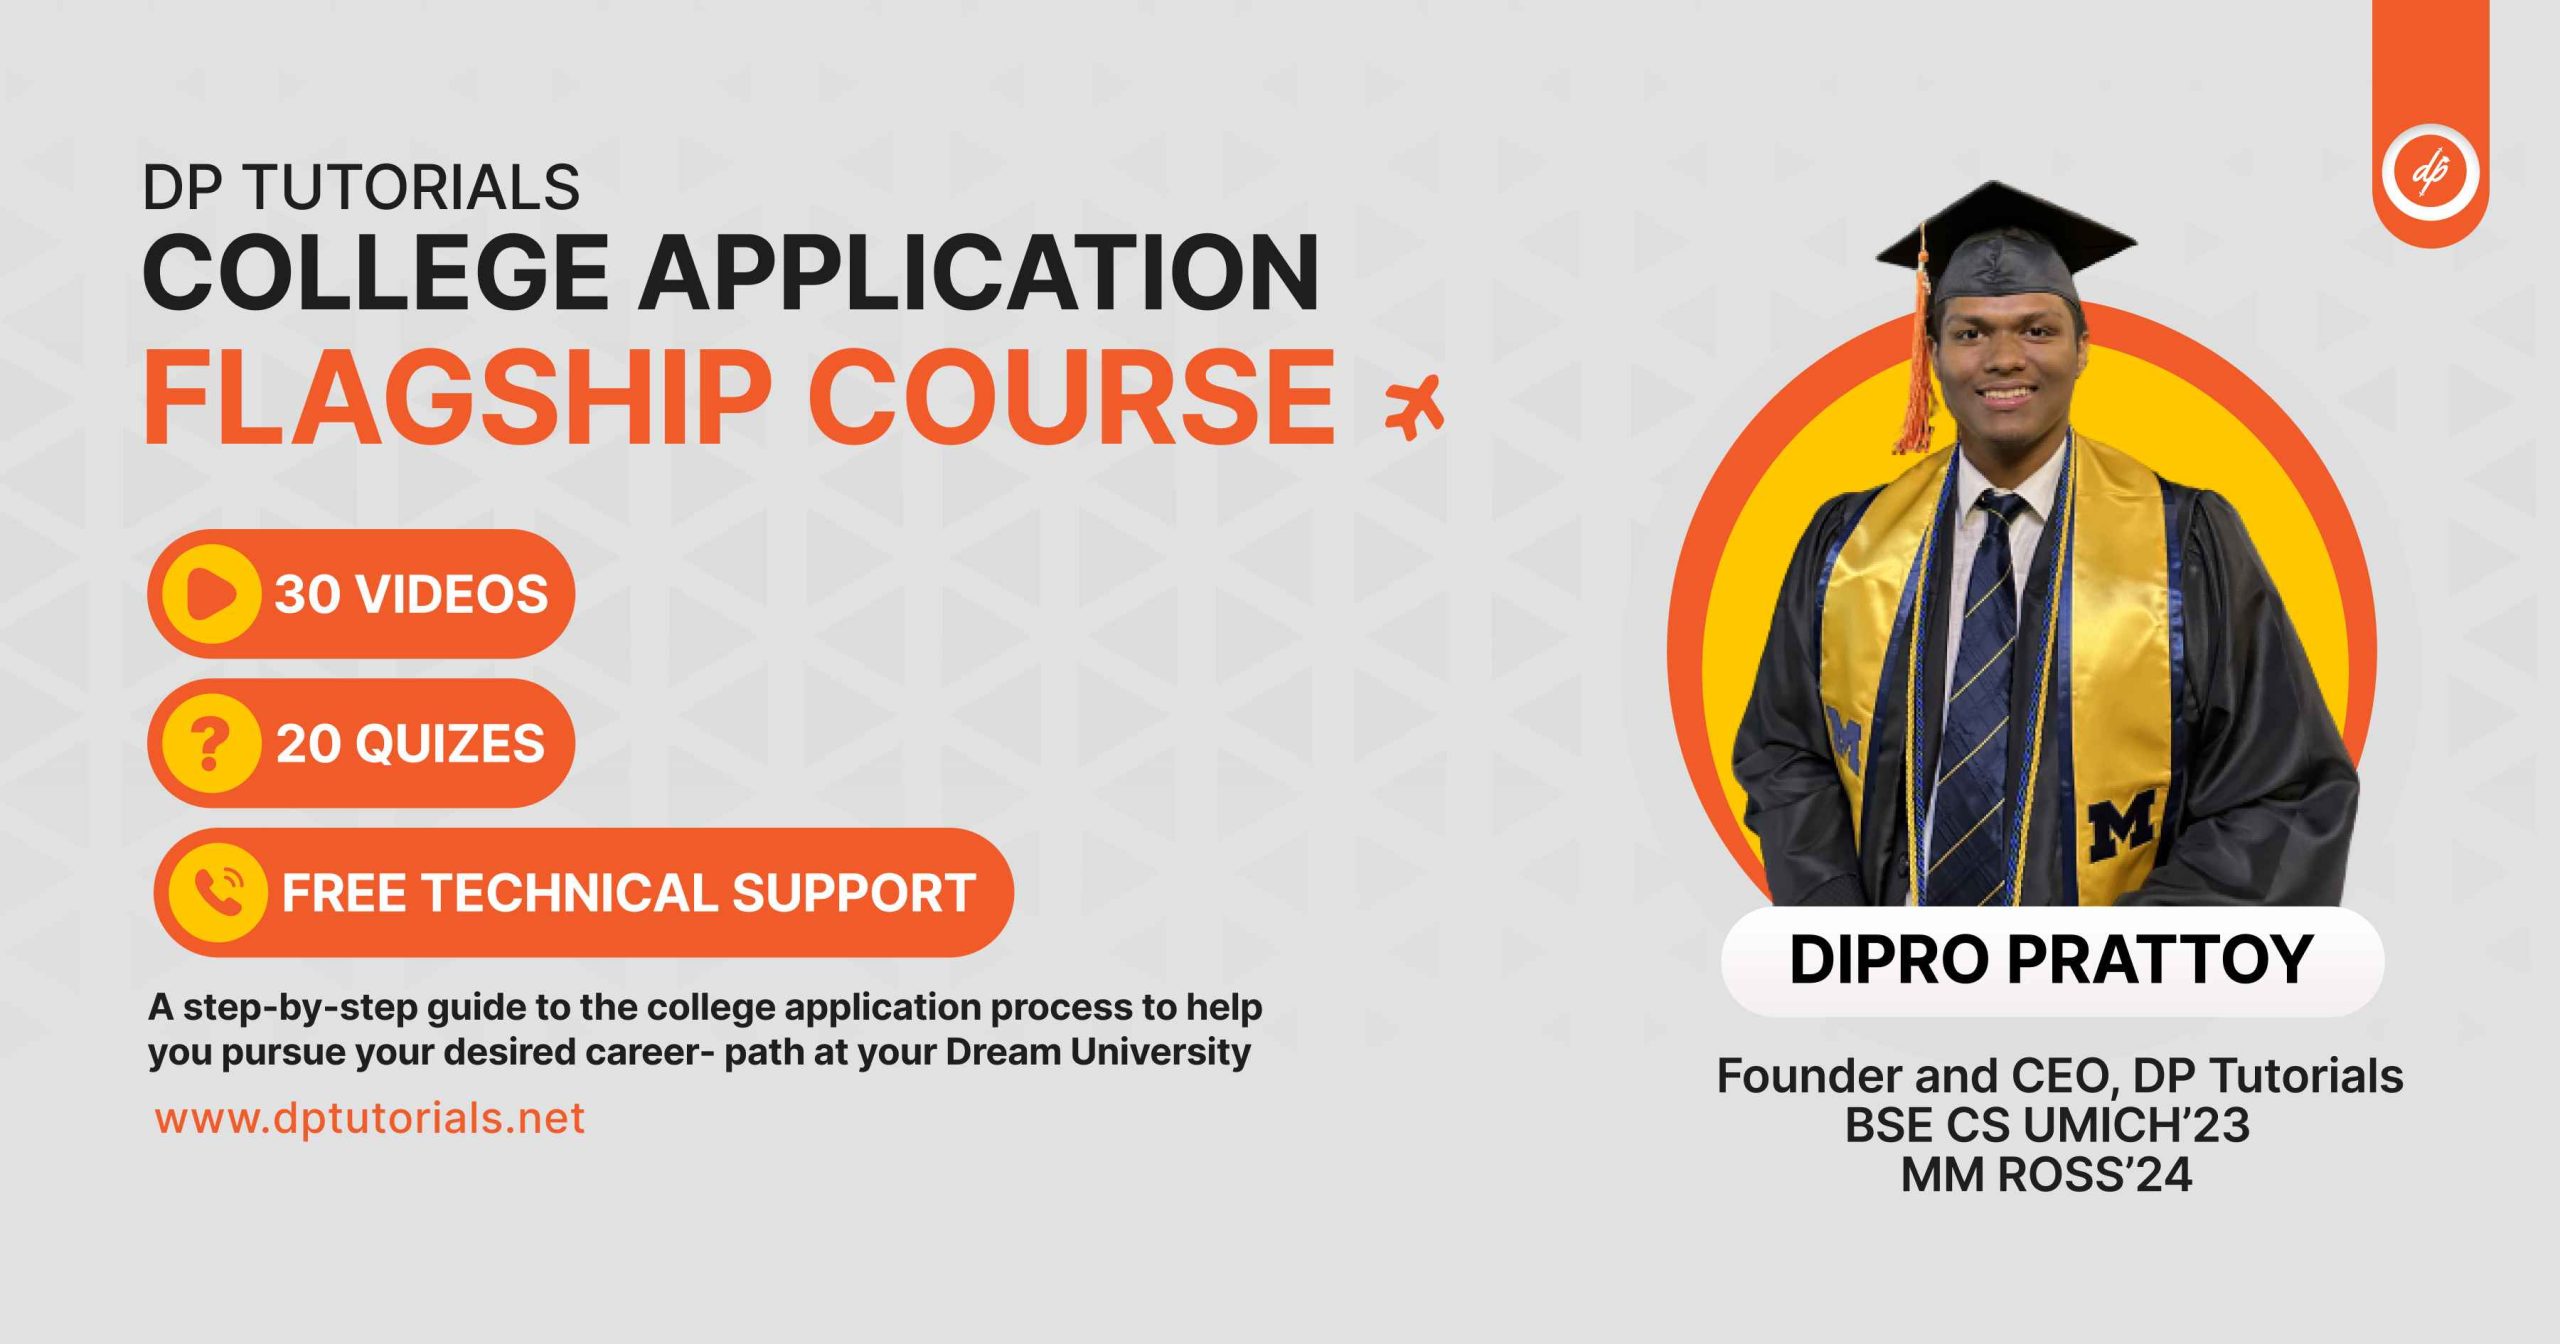 College Application Flagship Course